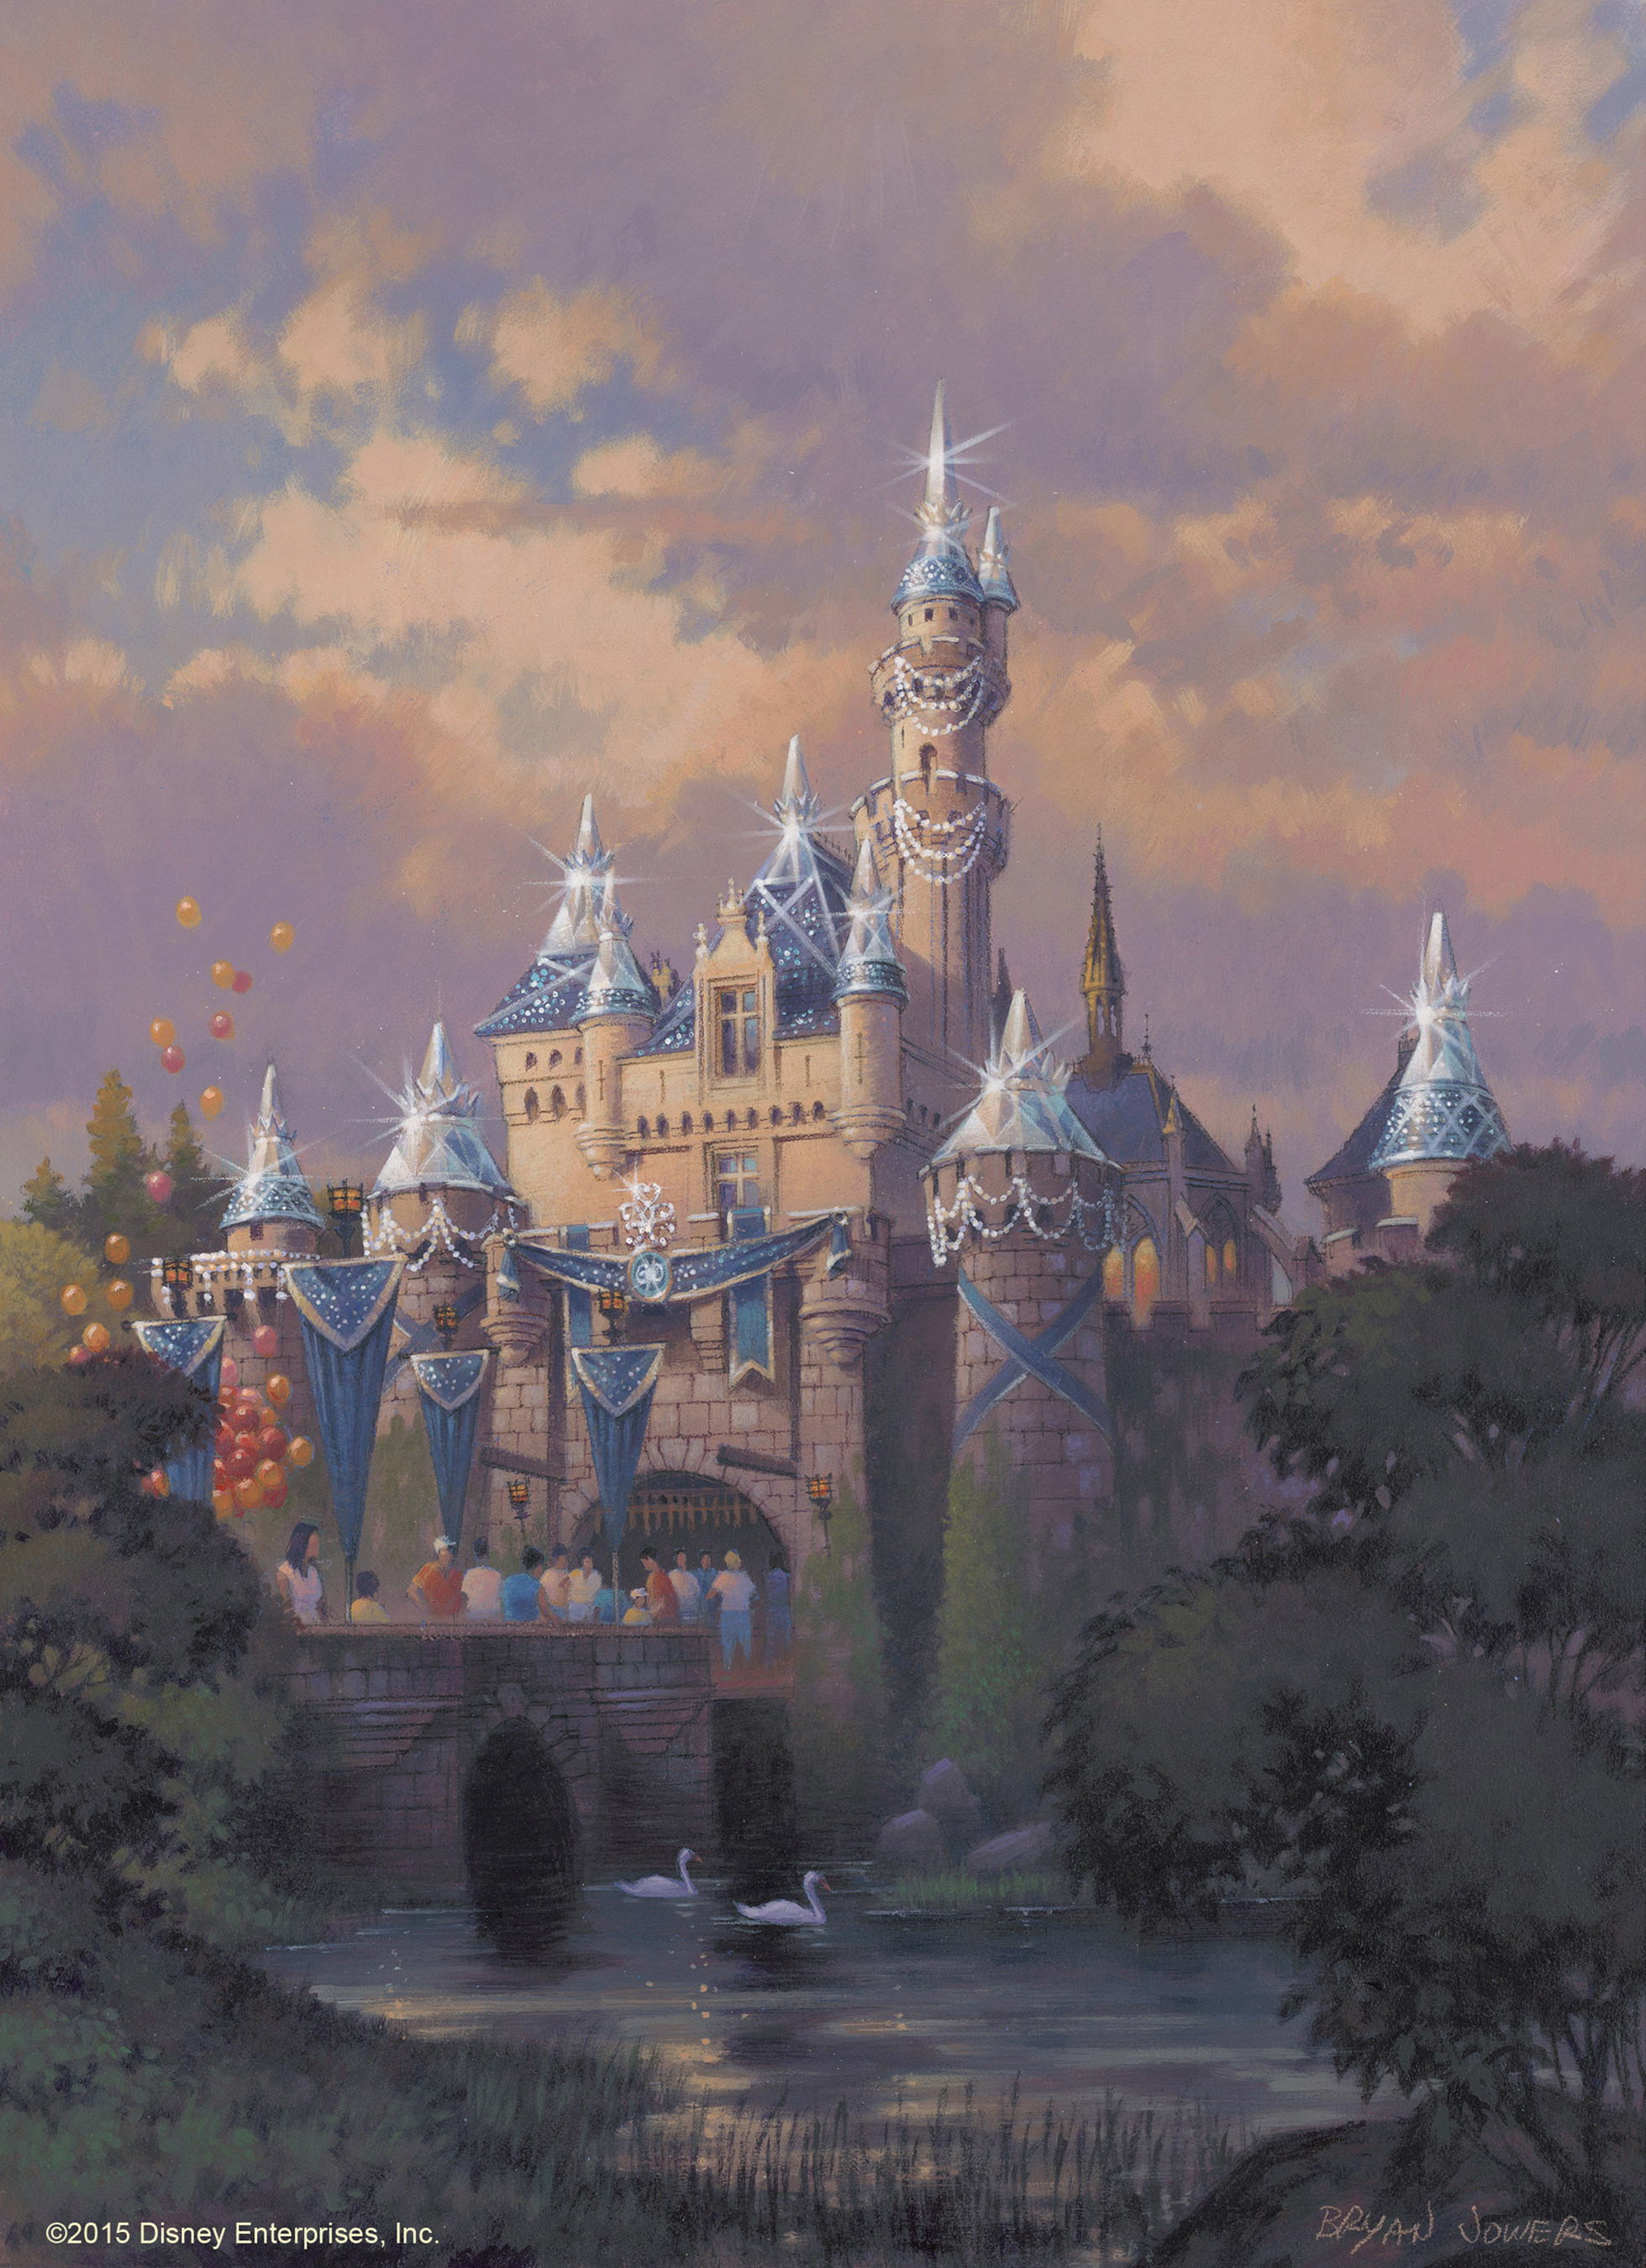 SPARKLING BEAUTY - This artist's rendering shows Sleeping Beauty Castle at Disneyland park draped in dazzling diamonds to commemorate the upcoming Diamond Celebration at the Disneyland Resort. From Sleeping Beauty Castle to Carthay Circle Theatre at Disney California Adventure park, the Disneyland Resort and surrounding streets of the Anaheim Resort district will sparkle with Diamond Celebration decor and festive banners in shades of Disneyland blue.